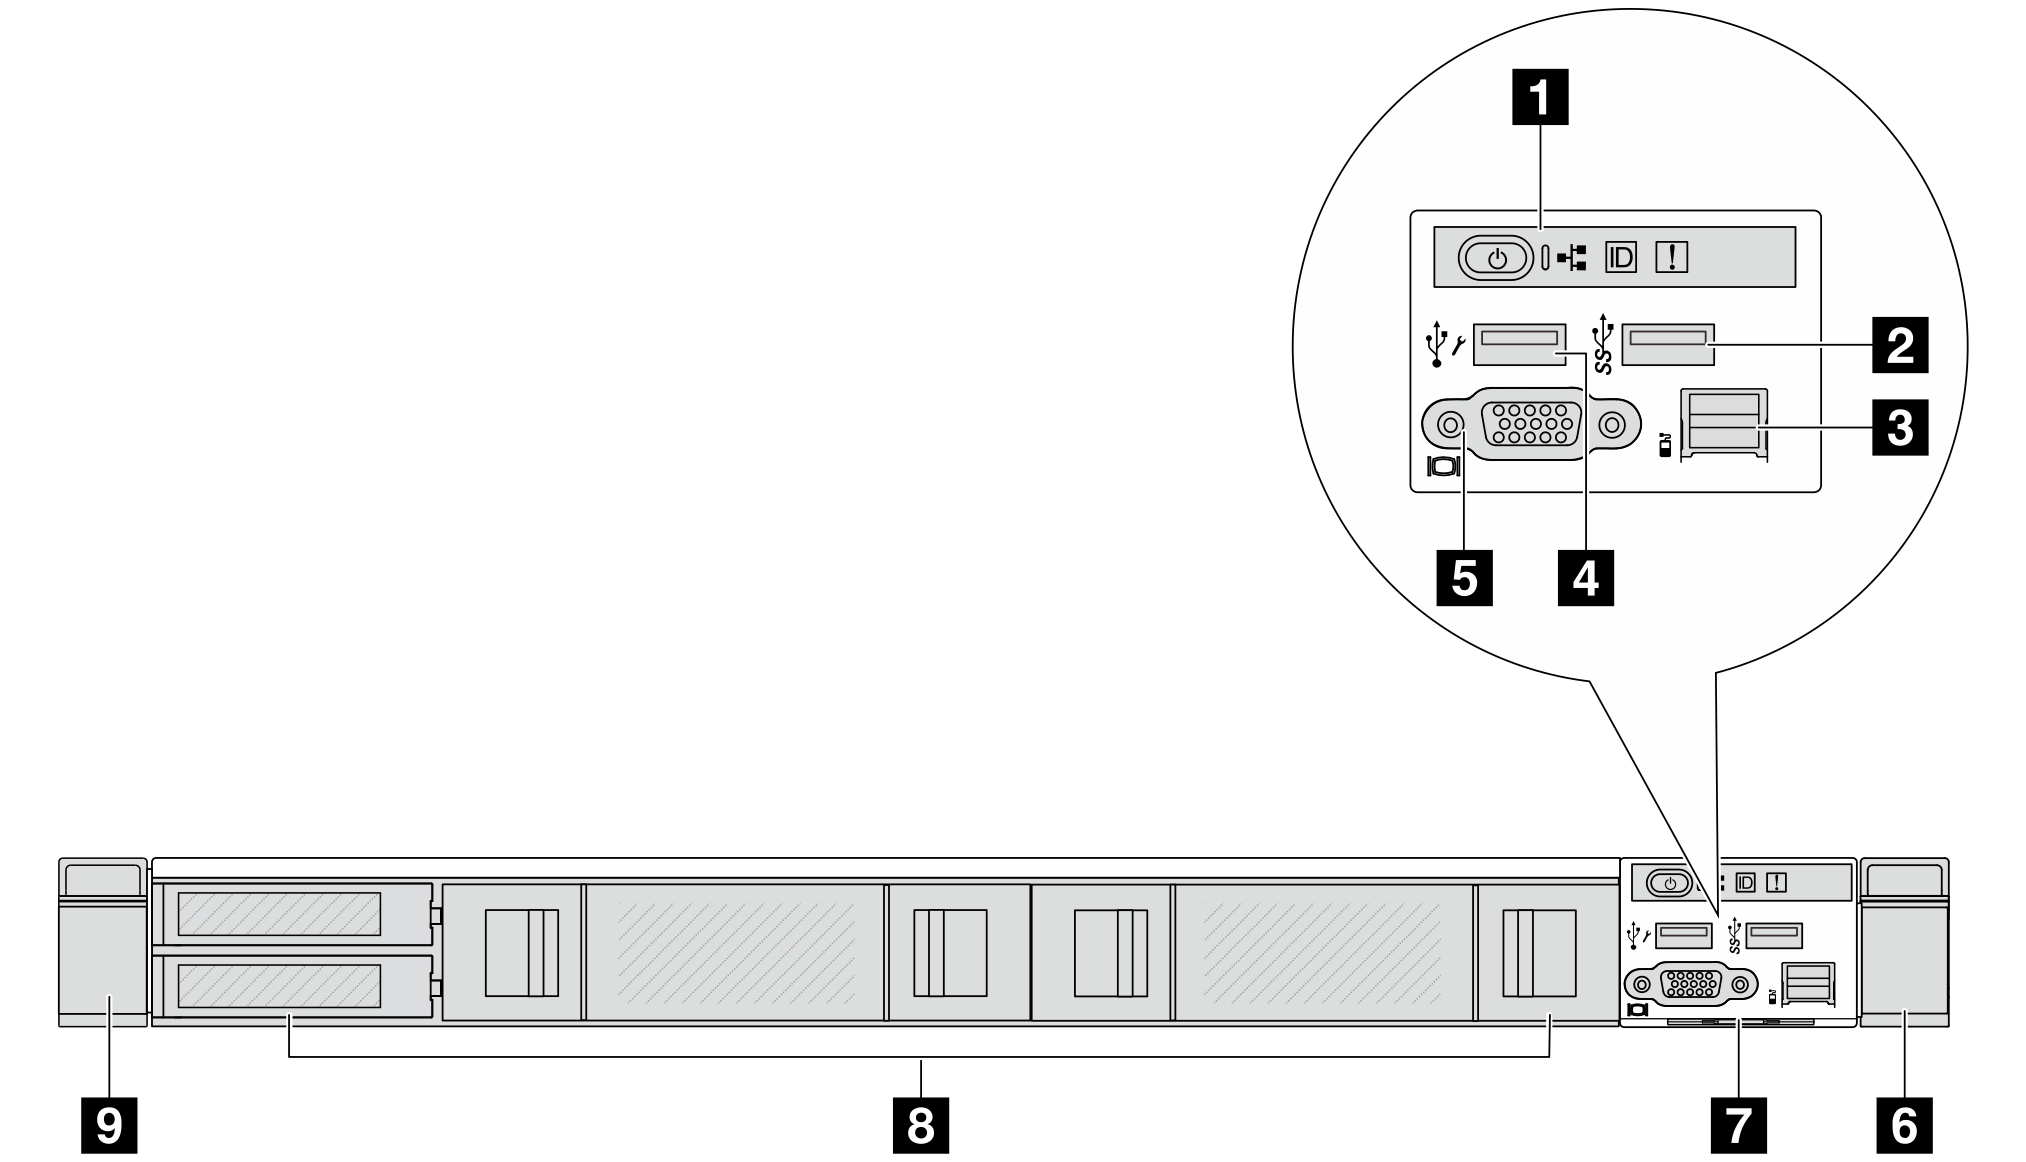 Front view of server model without a backplane (for ten 2.5'' drive bays)